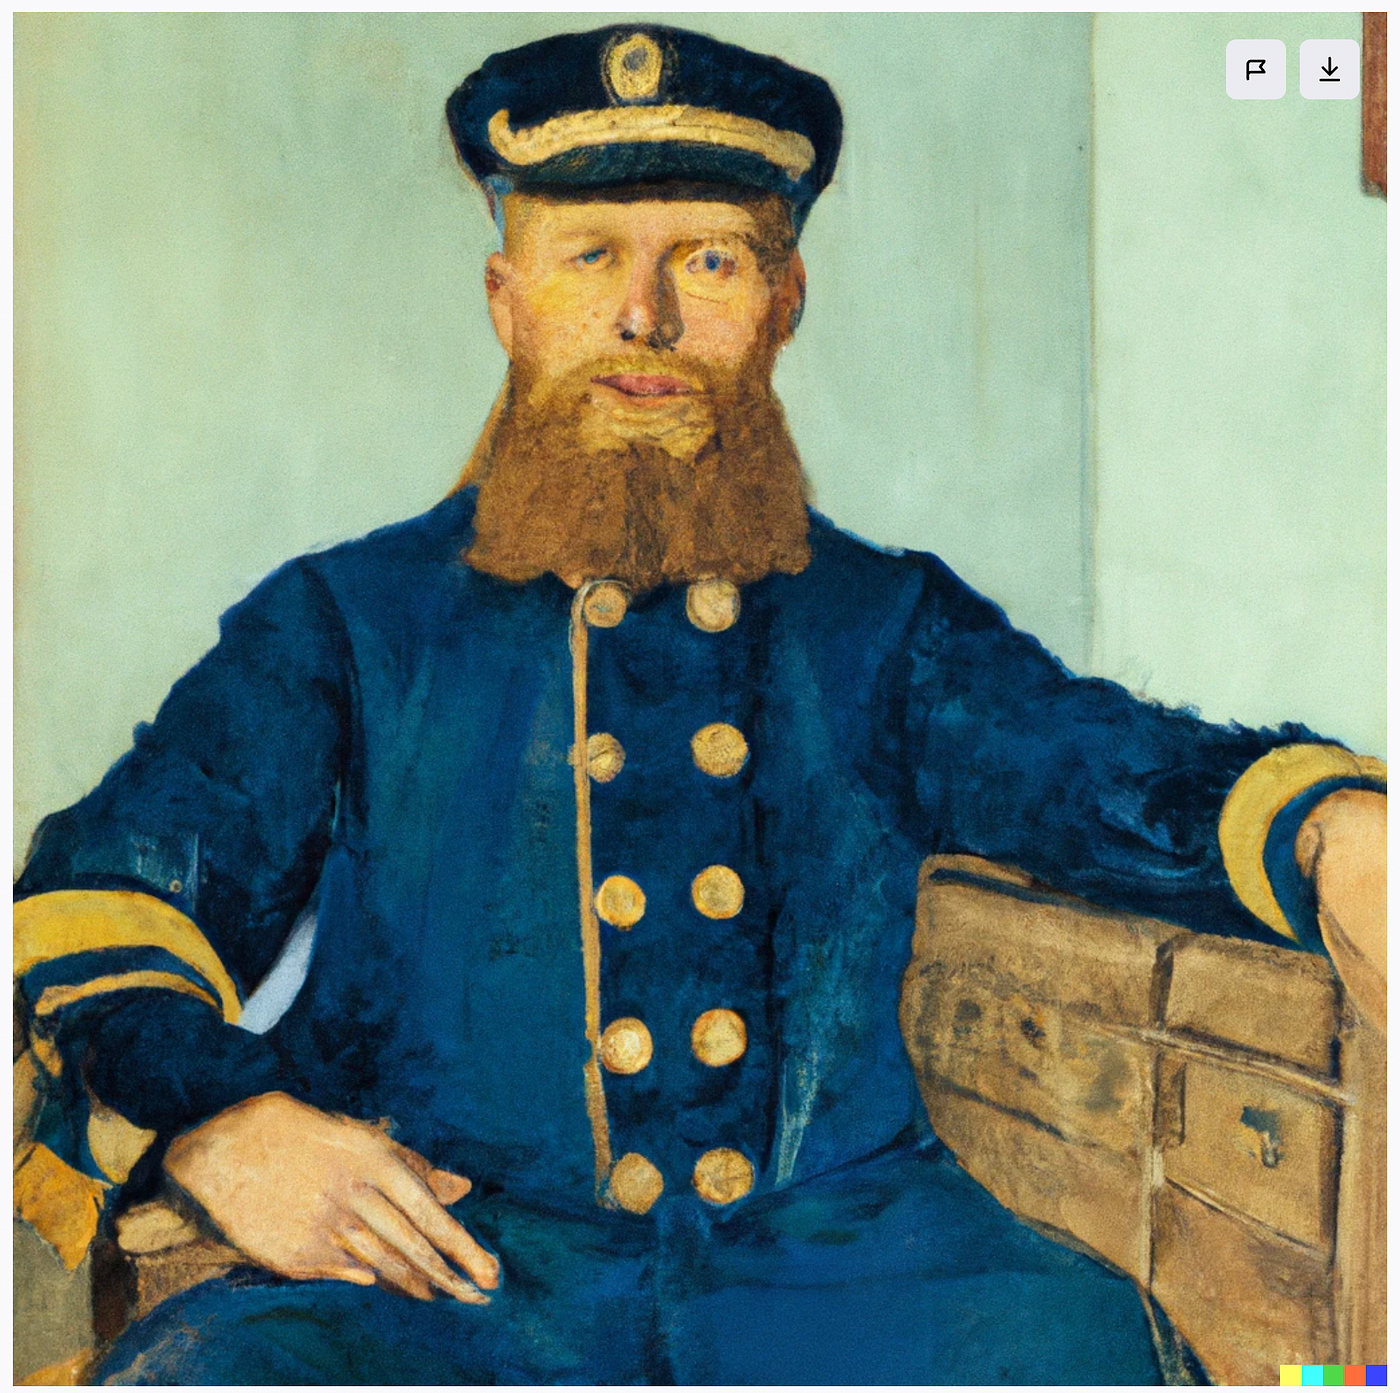 Van Gogh's Painting Portrait of the Postman, in Blue, Variations From  DALL-E is a Great Innovation | by Regia Marinho | Medium